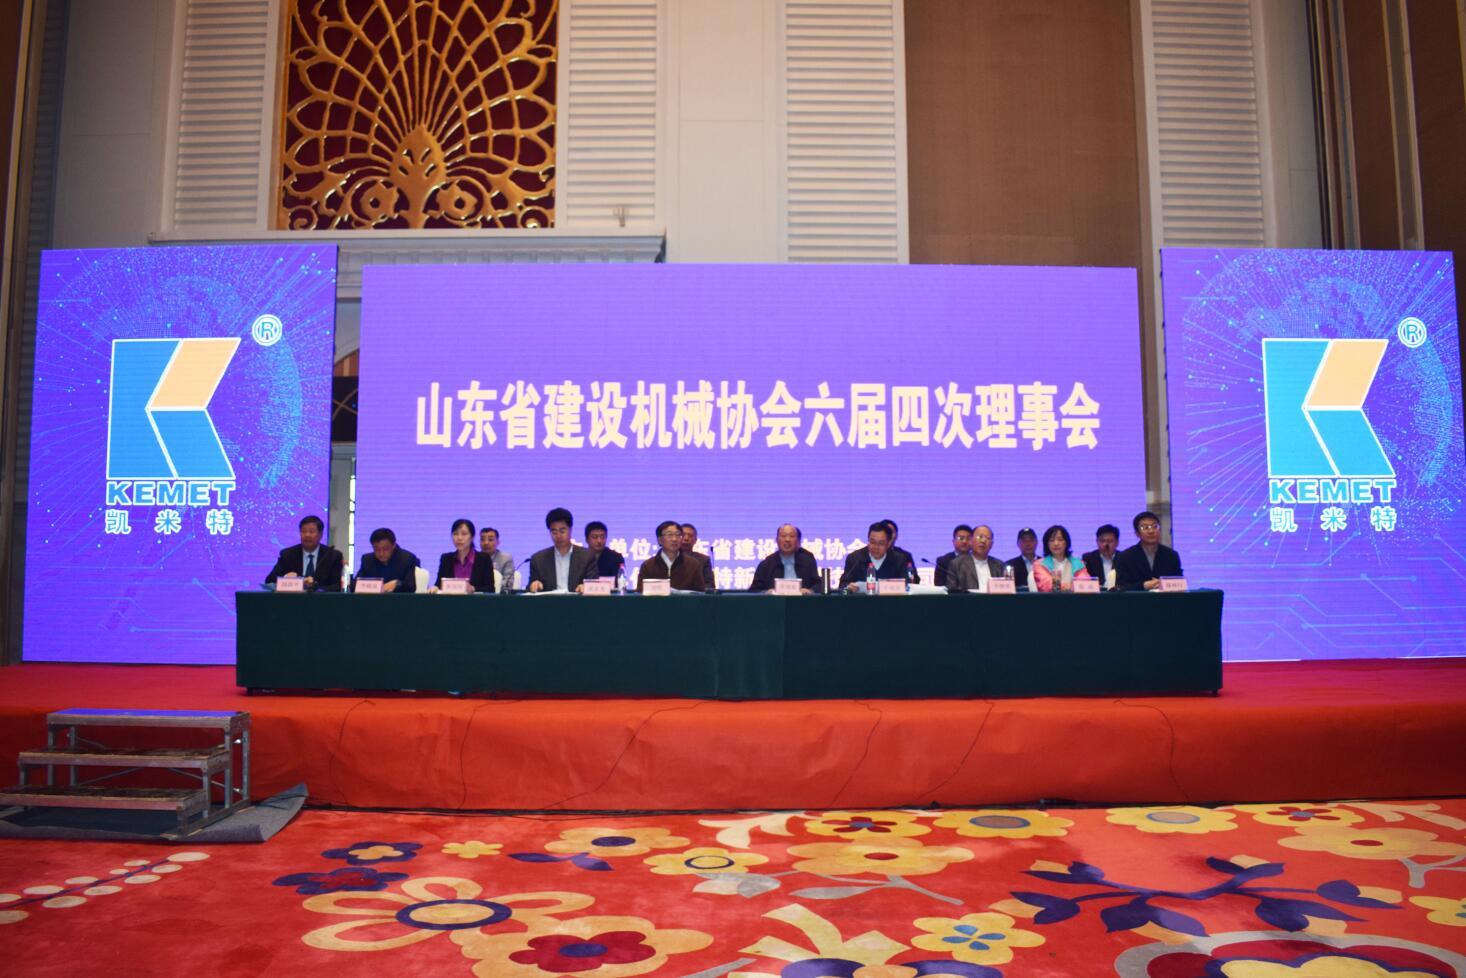 Kemet Company Successfully Undertake the Sixth Fourth Council of Shandong Construction Machinery Association and Fire-resistant Energy-saving Window Technology Exchange Conference